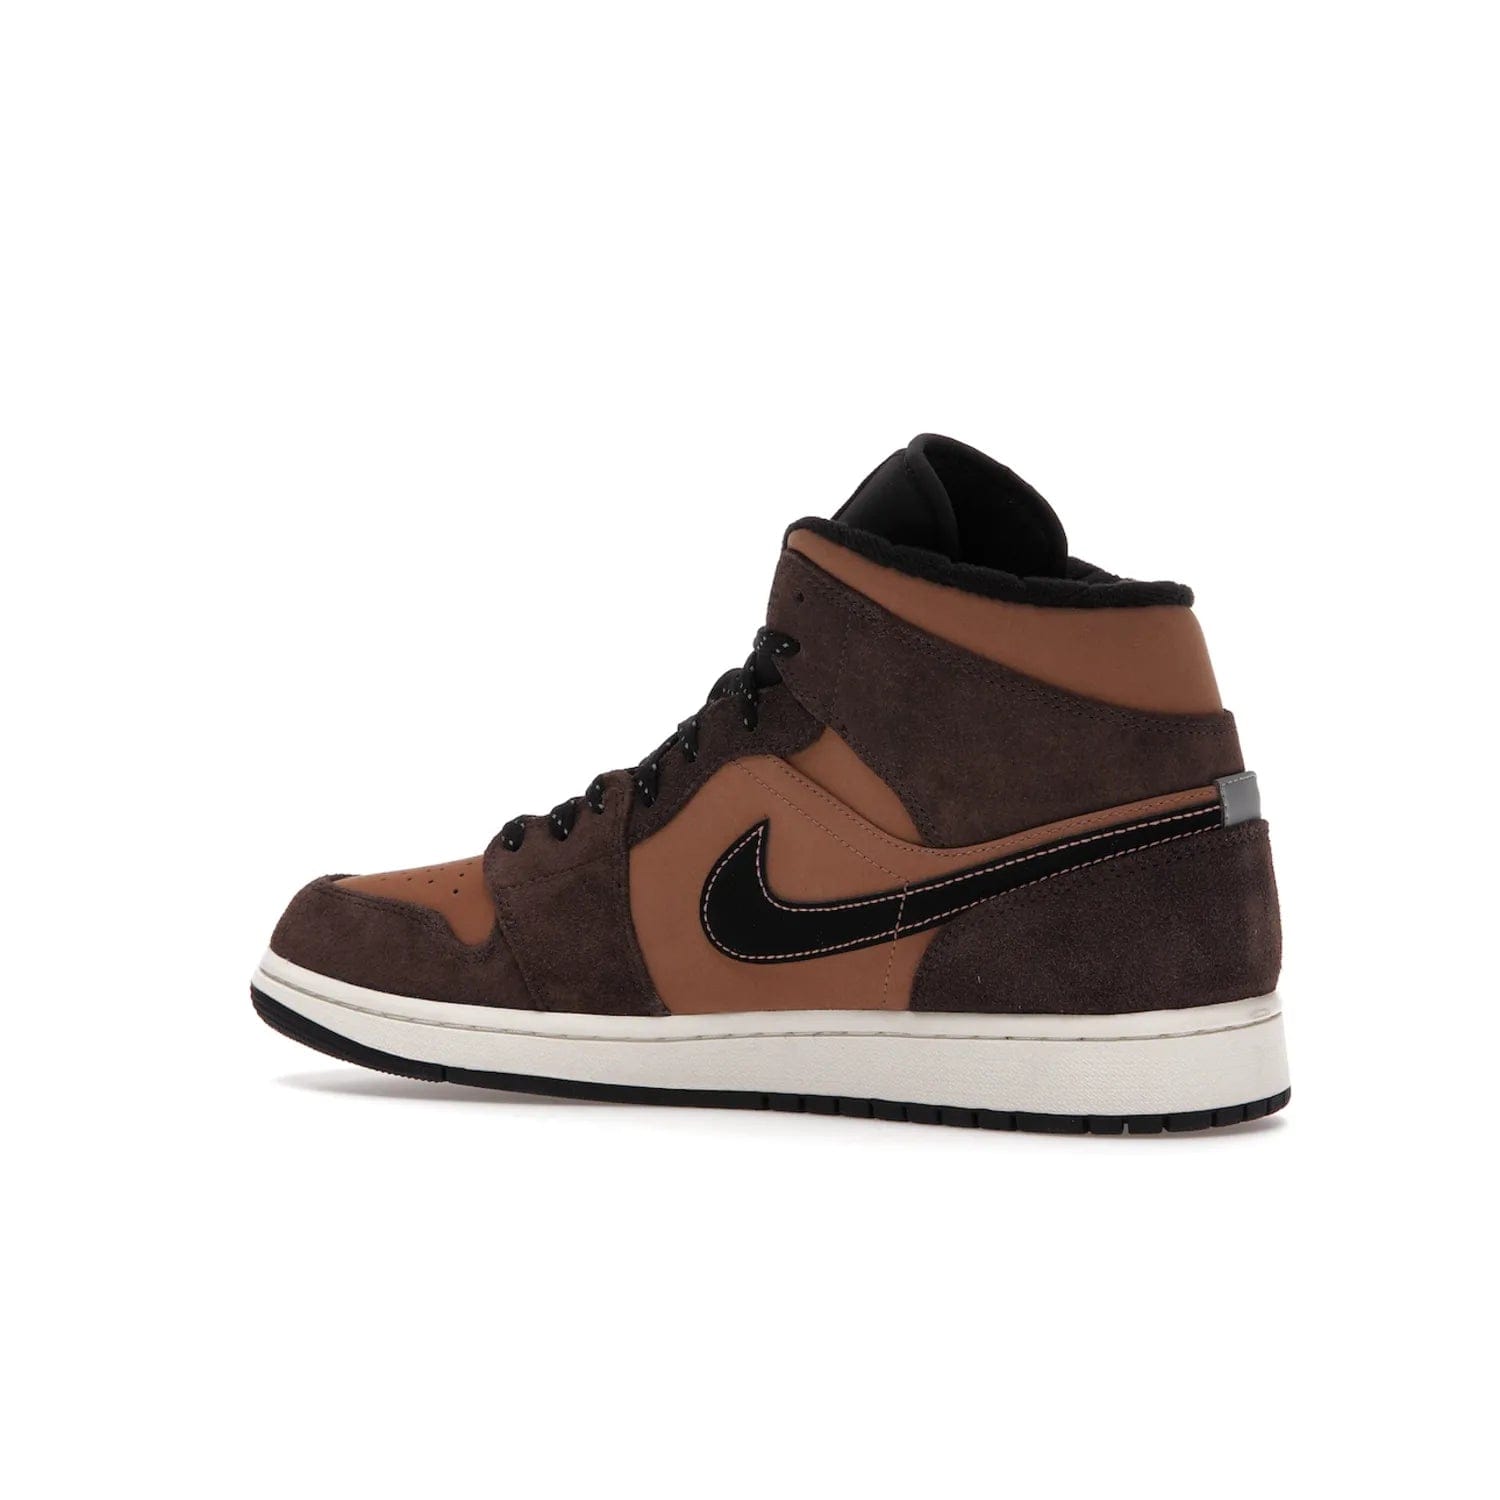 Jordan 1 Mid SE Dark Chocolate - Image 22 - Only at www.BallersClubKickz.com - This fashionable and functional Jordan 1 Mid SE Dark Chocolate features a light brown Durabuck upper, dark brown suede overlays, black Swoosh logos and reflective patch at heel. A must-have for any sneakerhead!